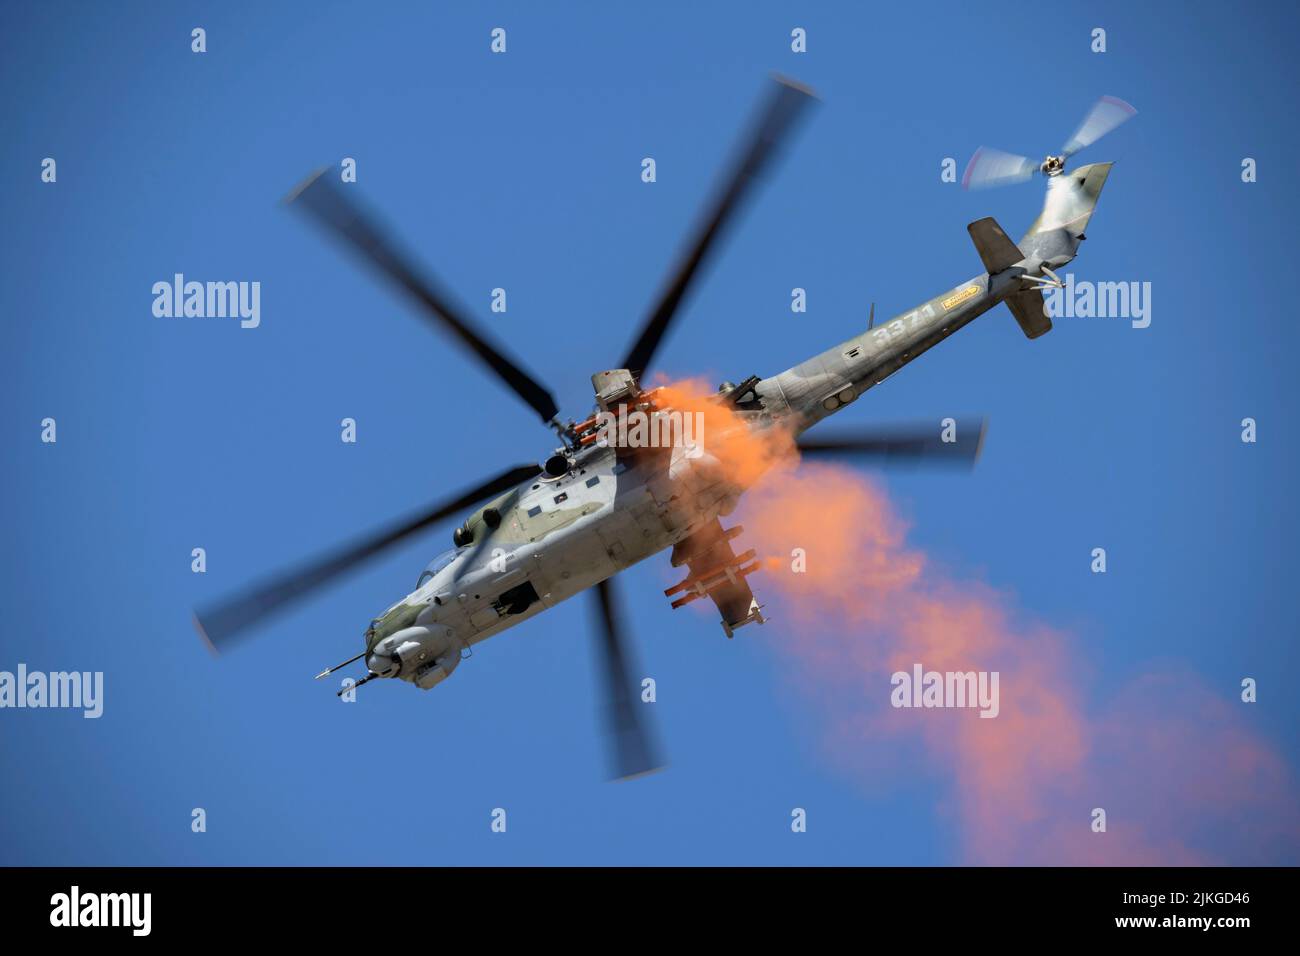 Czech Air Force Mil Mi24 Hind Gunship/Attack helicopter at the Royal International Air Tattoo Stock Photo